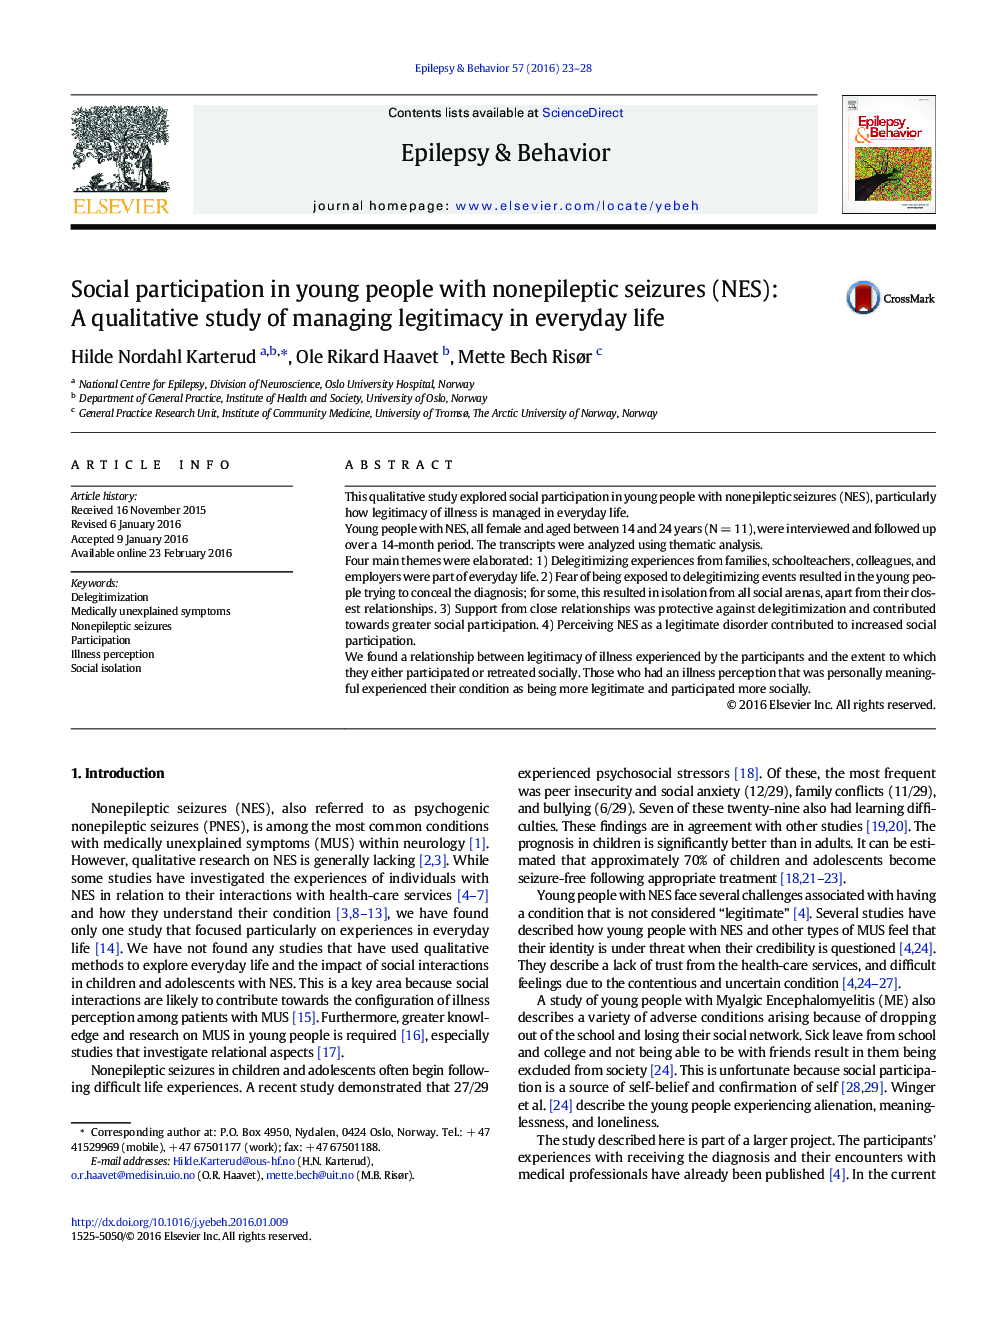 Social participation in young people with nonepileptic seizures (NES): A qualitative study of managing legitimacy in everyday life